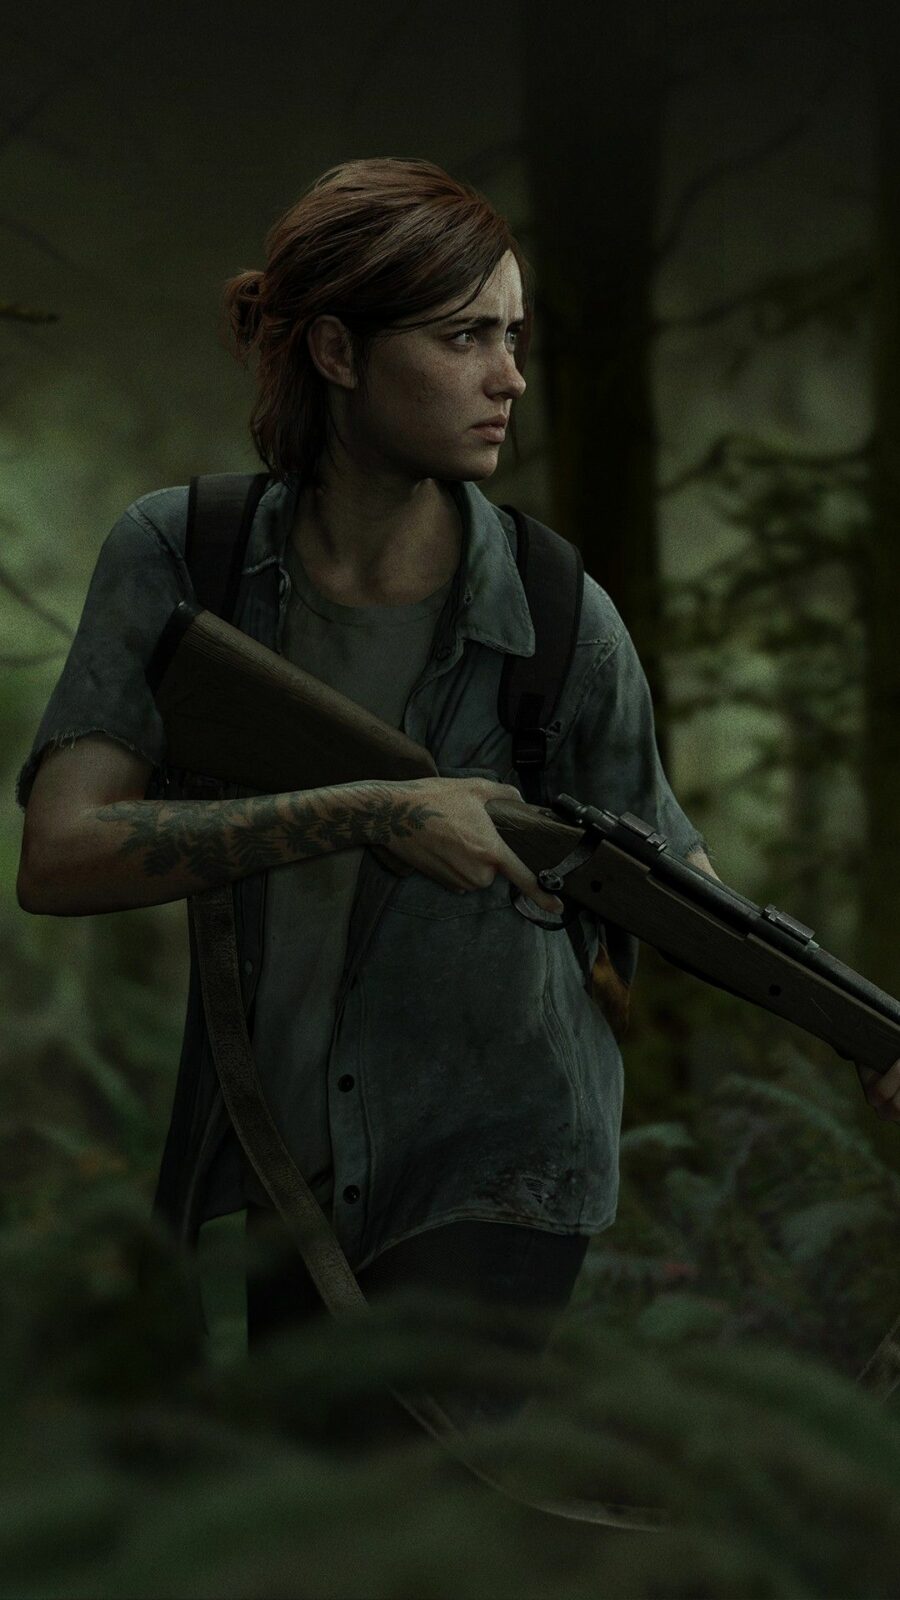 The Last Of Us Part 2 Wallpaper Iphone Android 4k 17